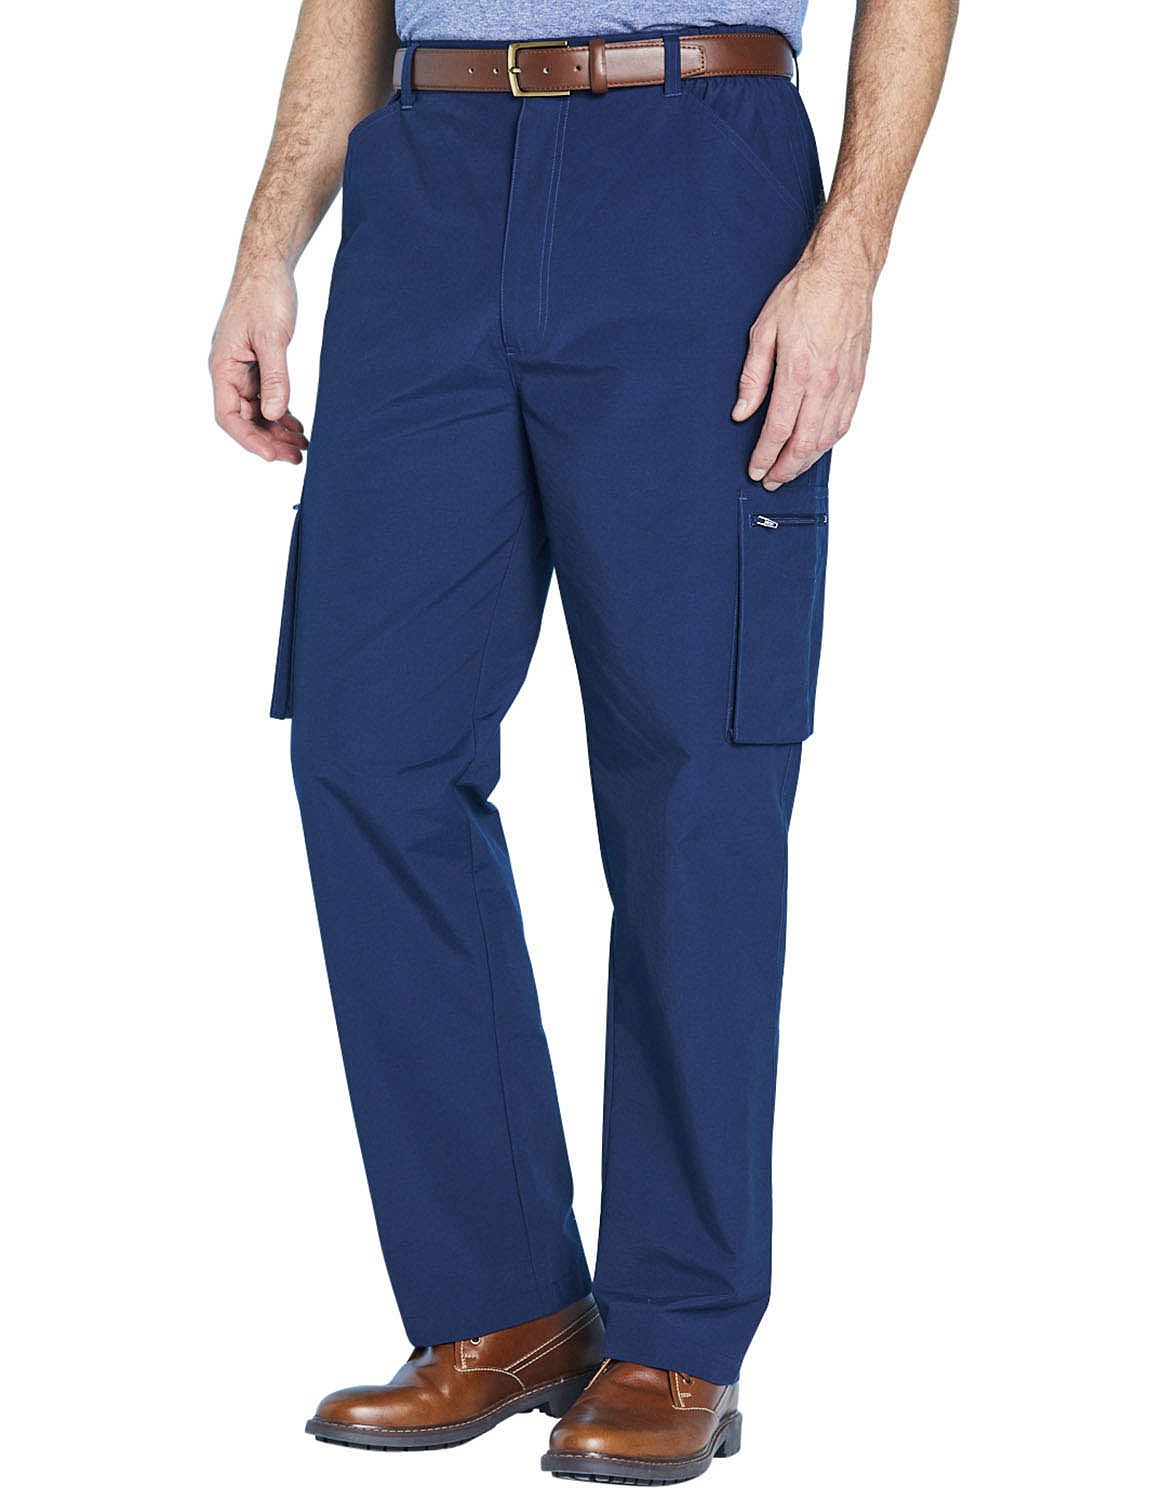 Water Resistant Action Style Trousers | Chums